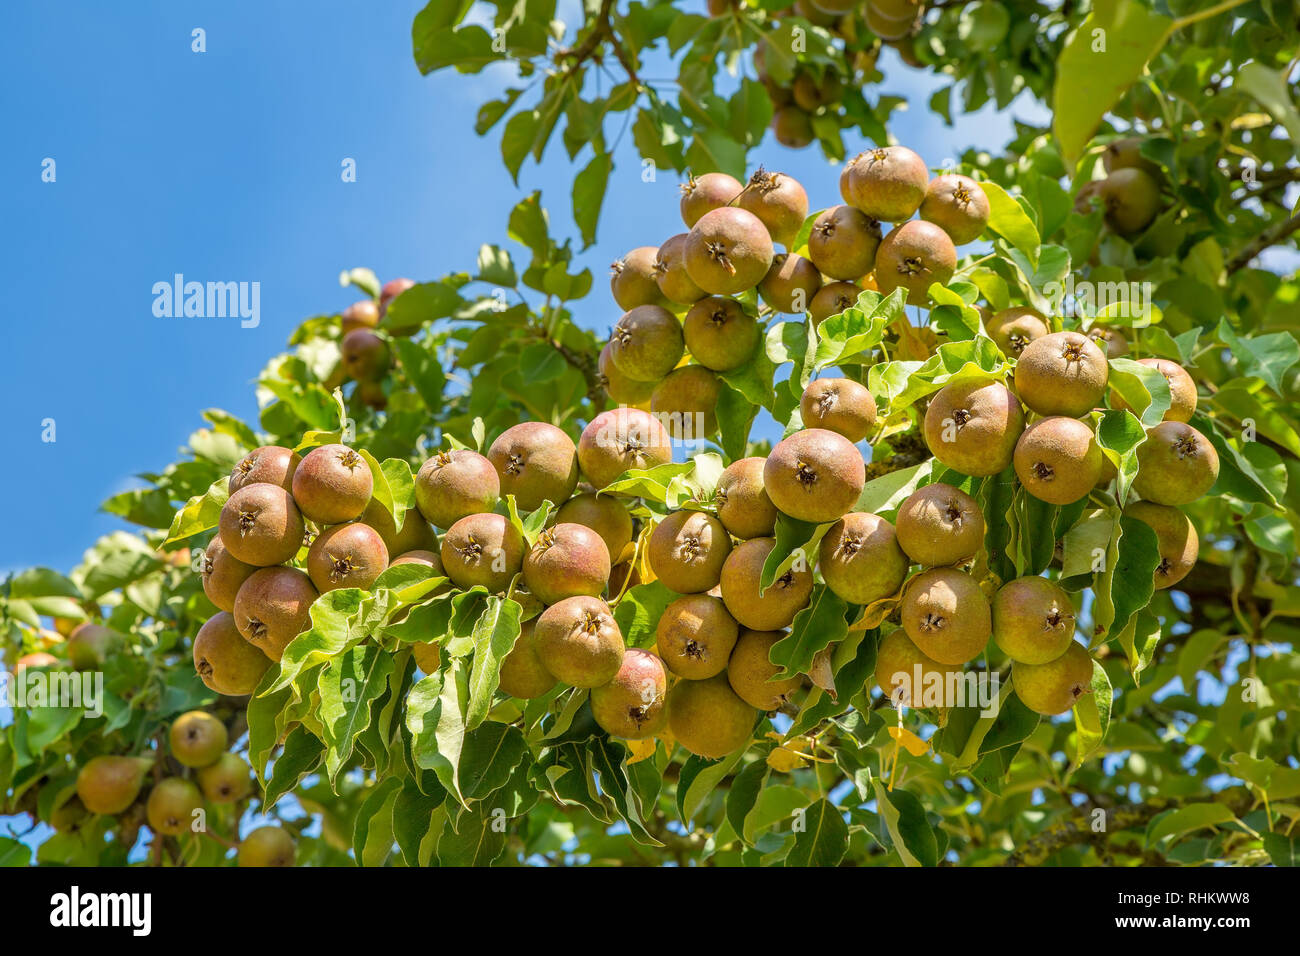 Many pears hanging at branch of pear tree with blue sky Stock Photo